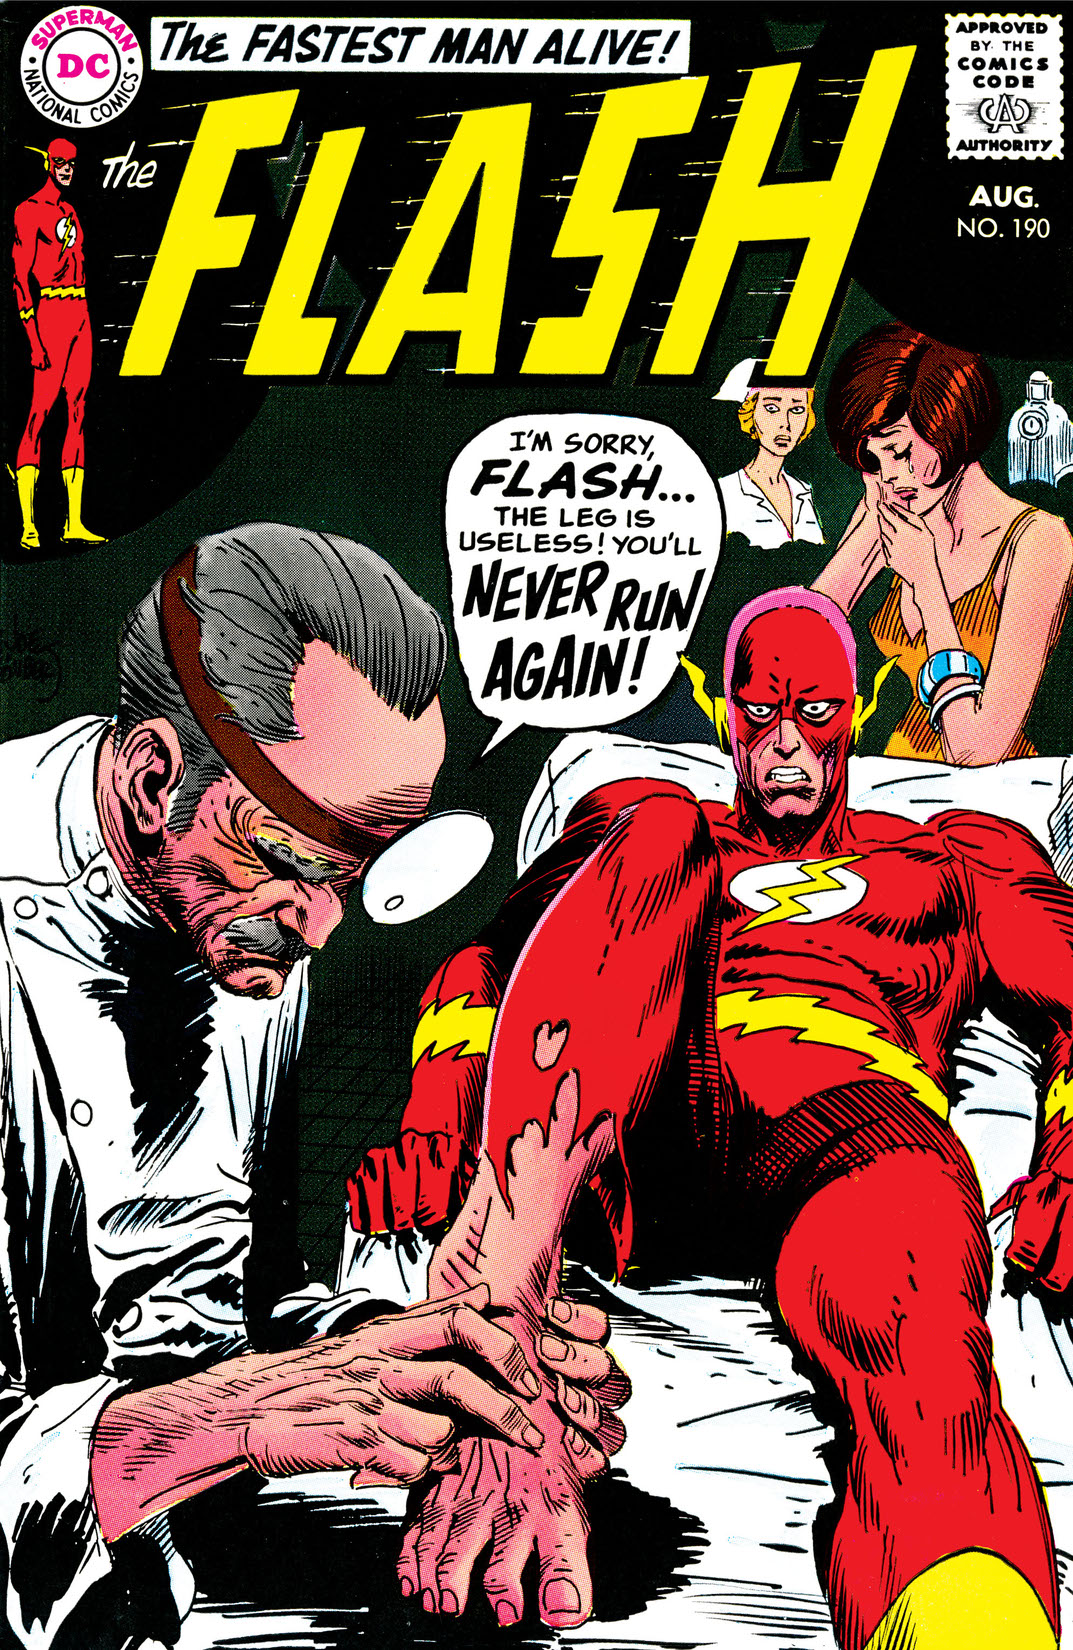 The Flash (1959-) #190 preview images